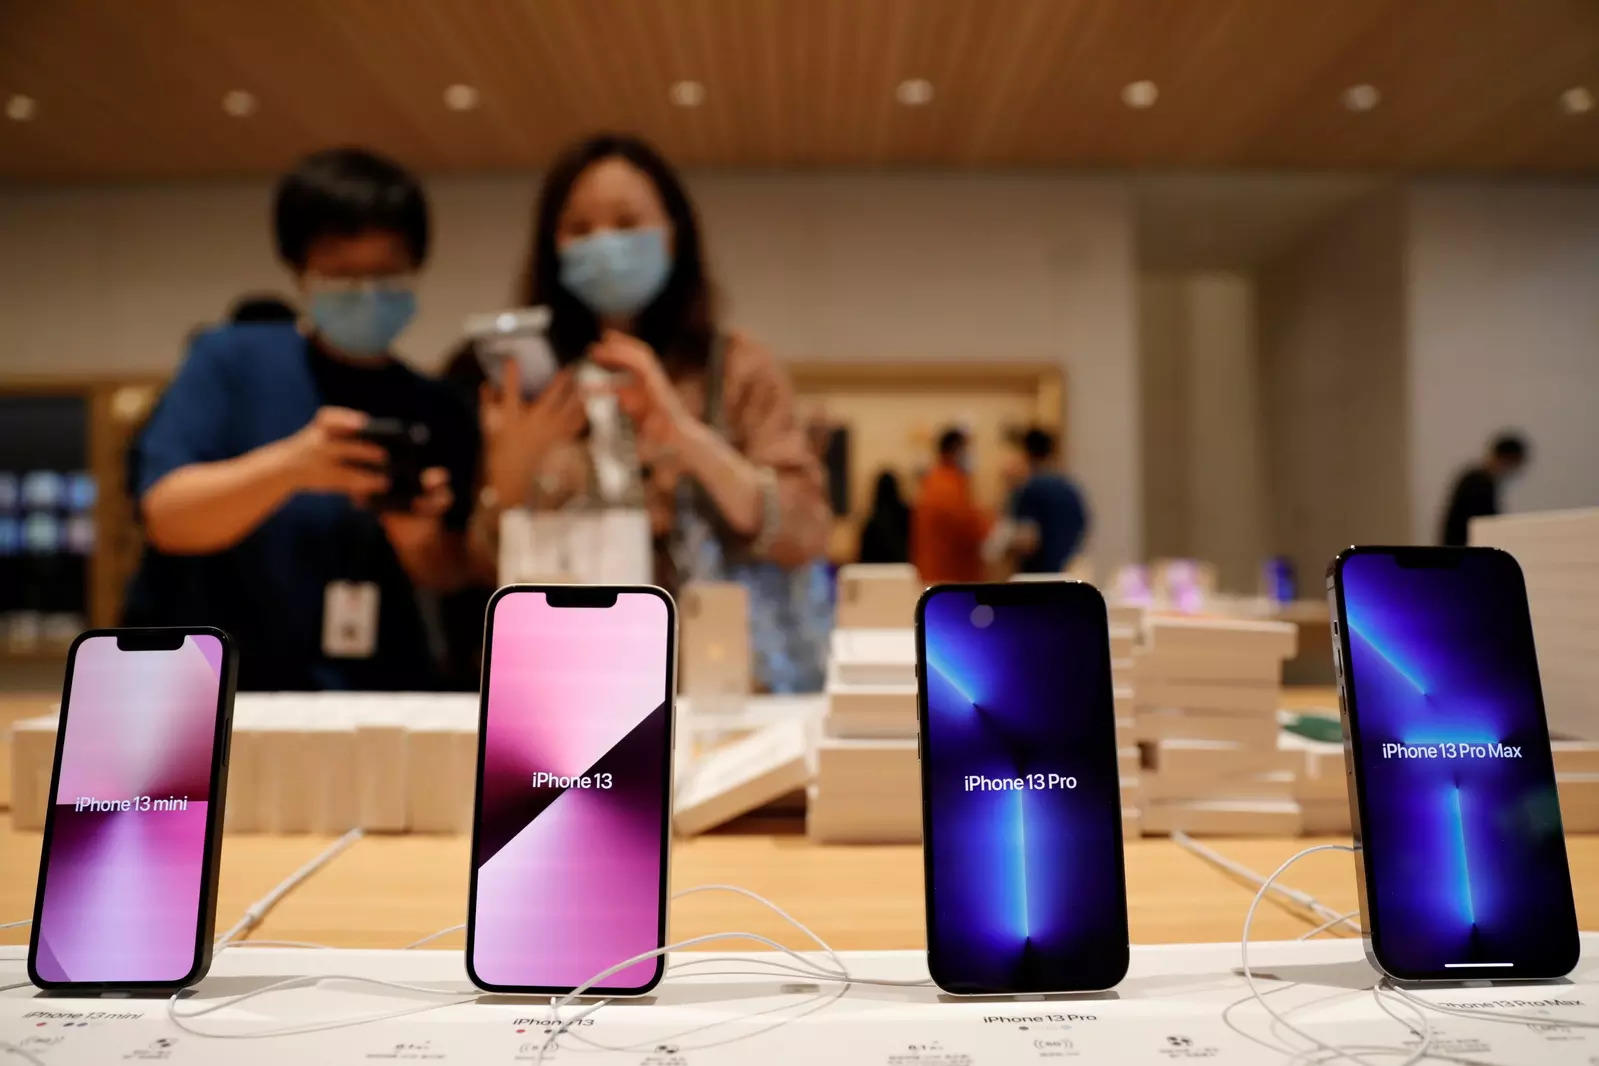 Planning to buy iPhone 13? Face ID won't work if you get a broken screen repaired by a third-party vendor